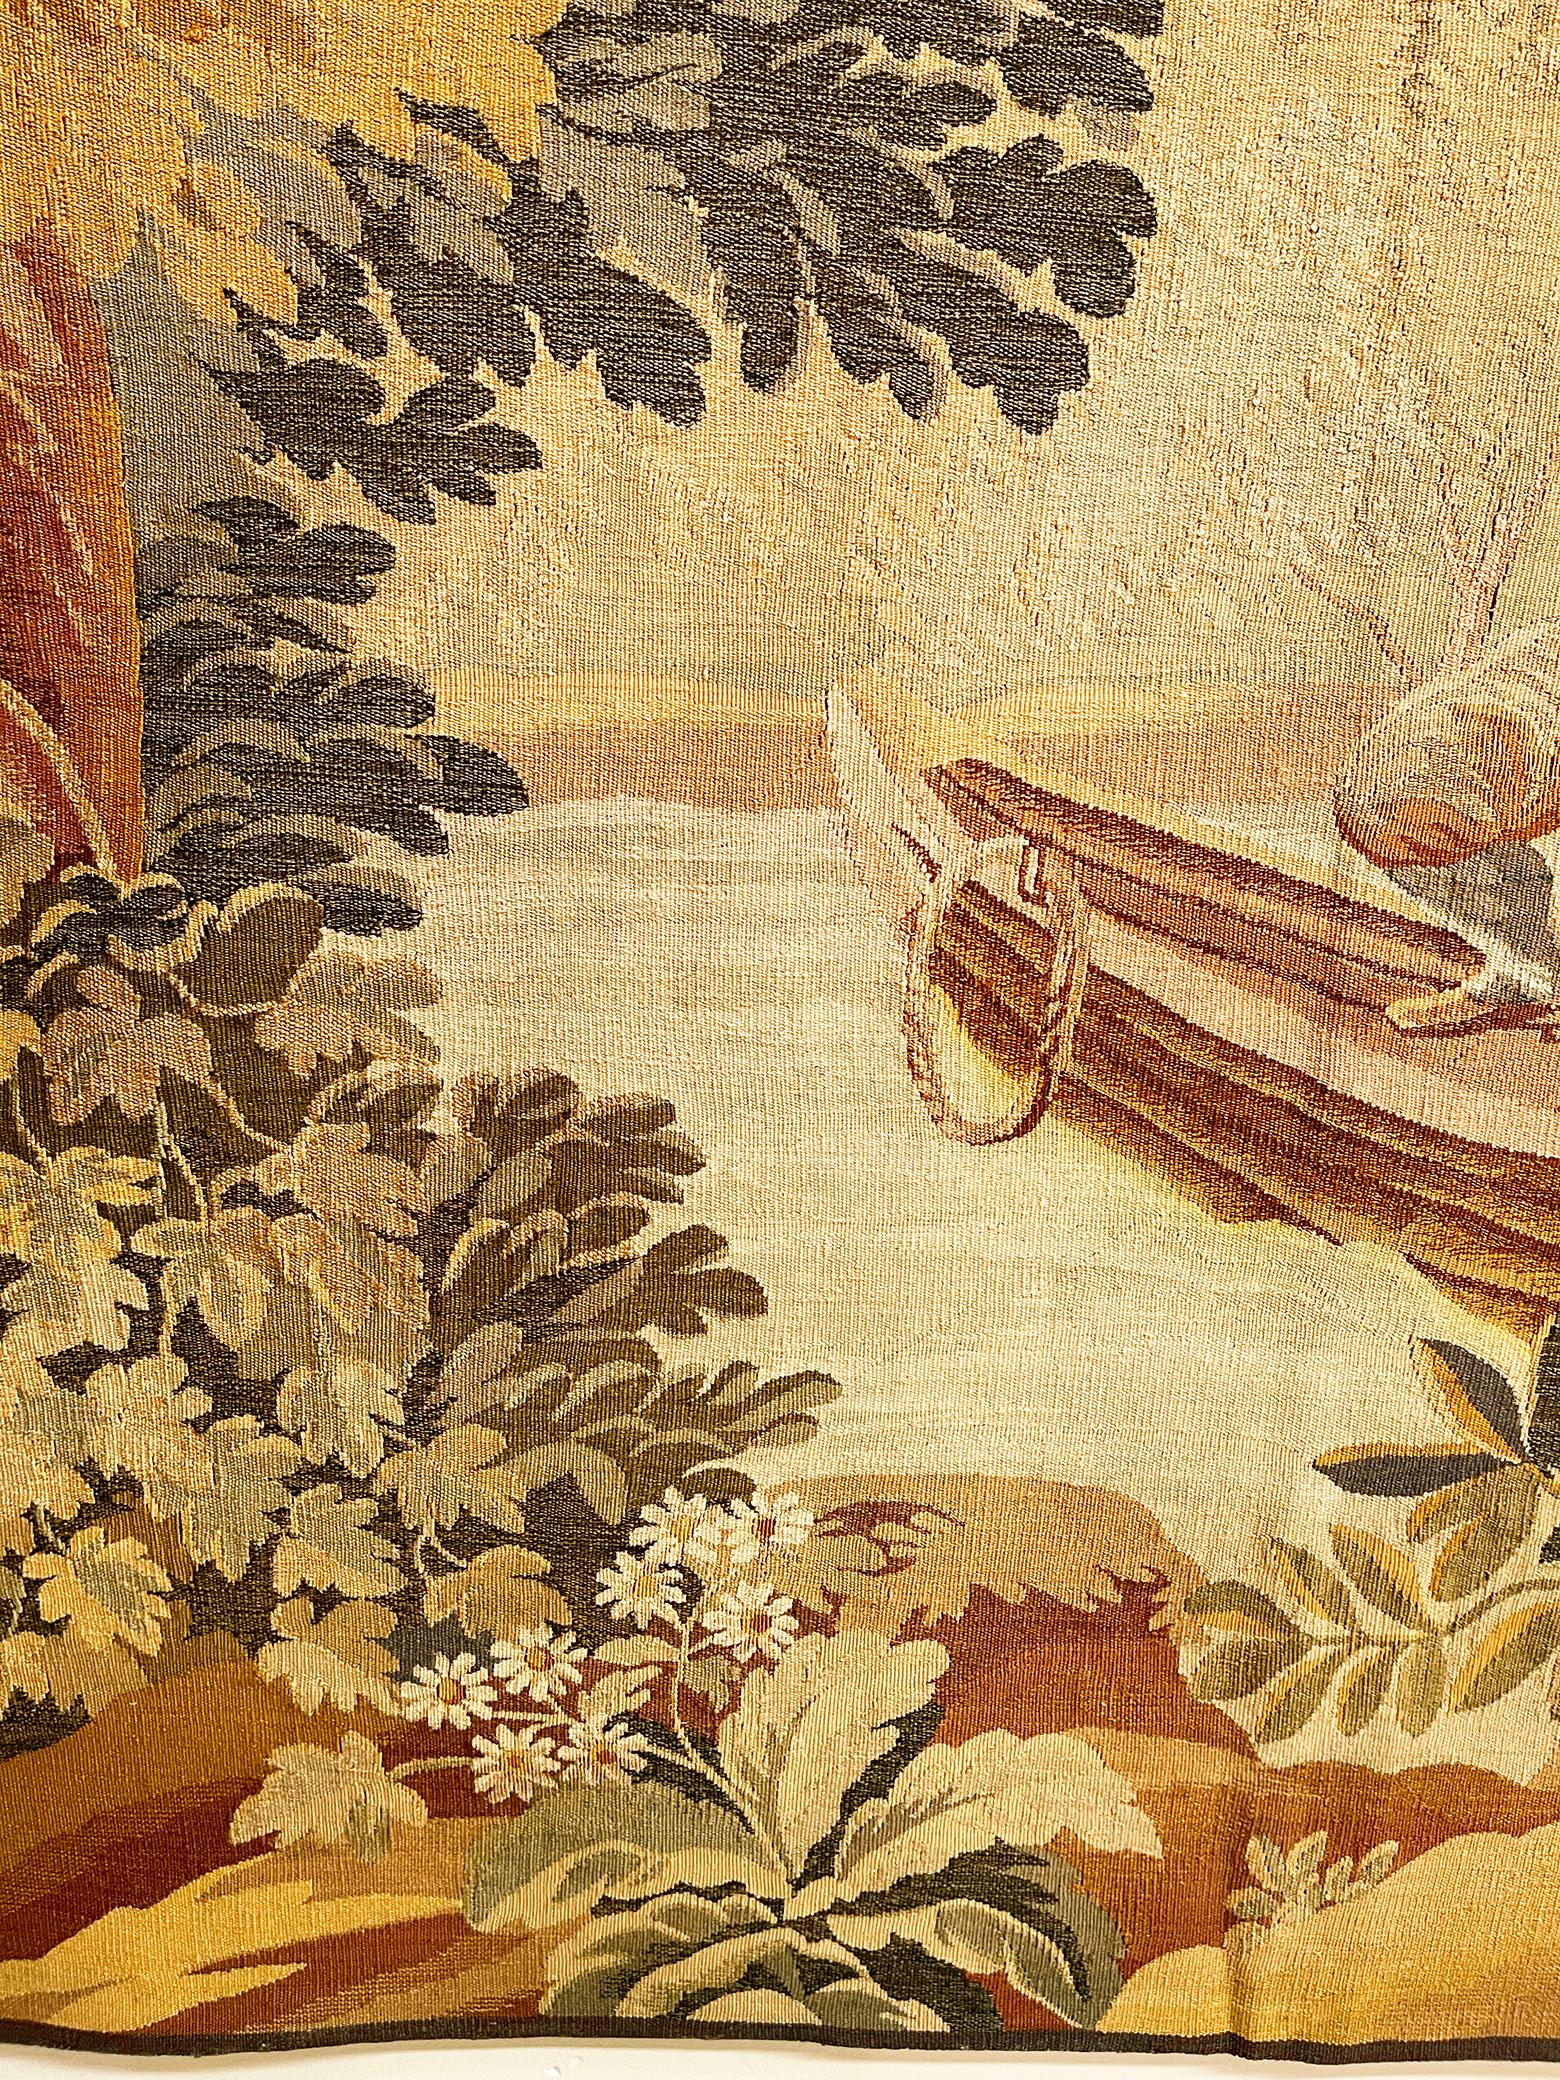 Late 19th Century French Aubusson Rustic Tapestry, with Fishermen at Sea 2